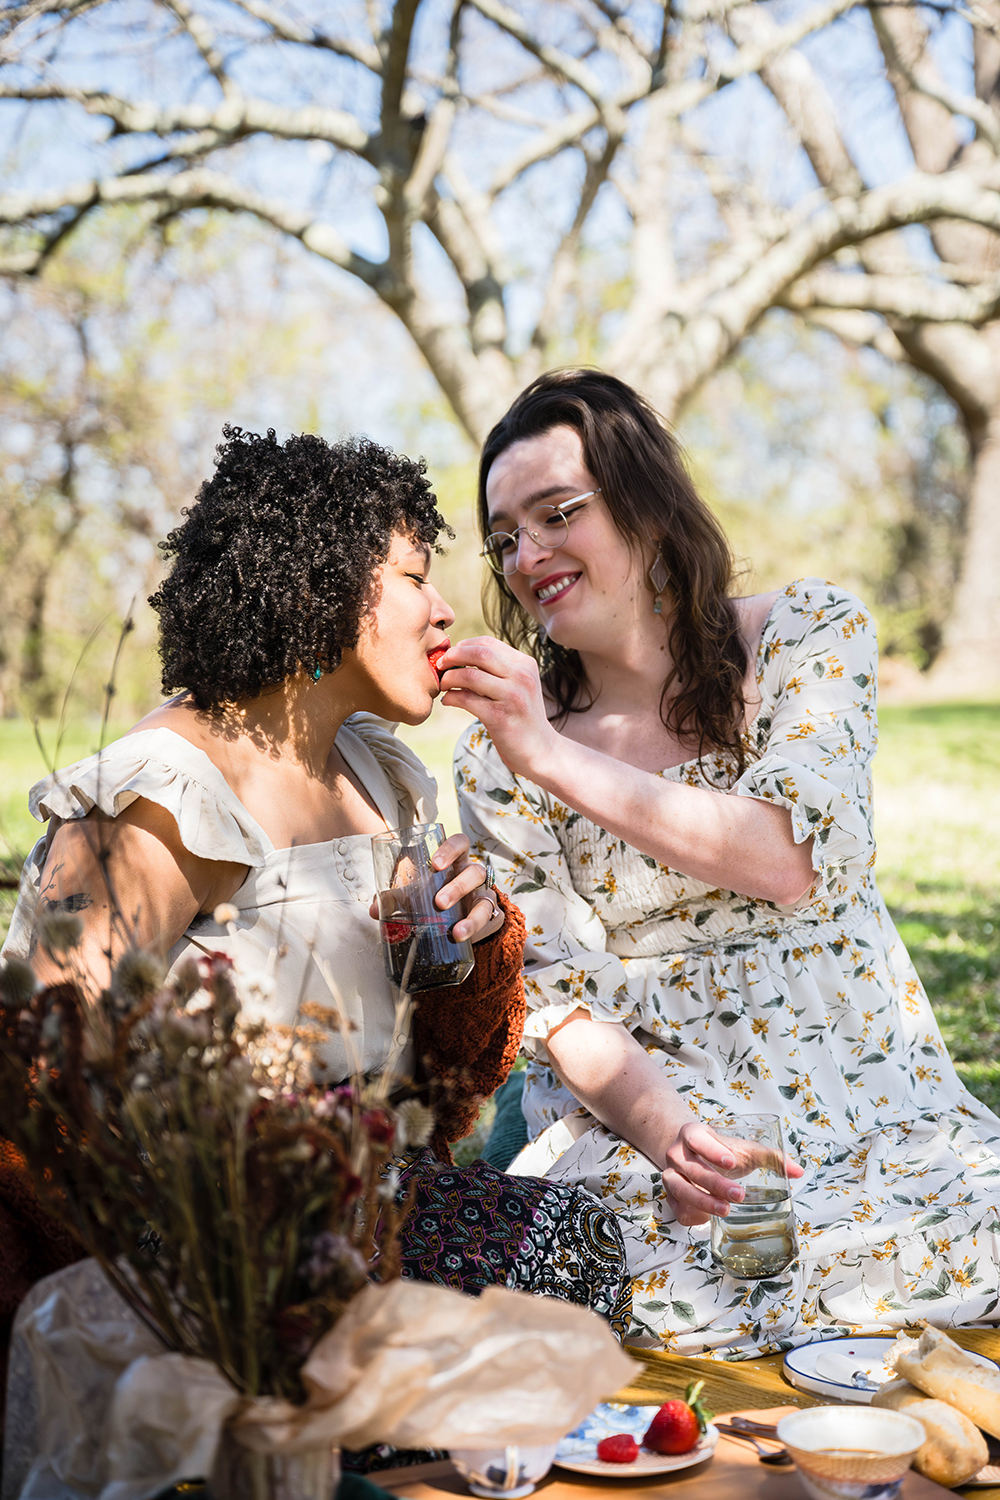 A partner in a couple feeds their significant other a strawberry while having a picnic at Duck Pond for their elopement.